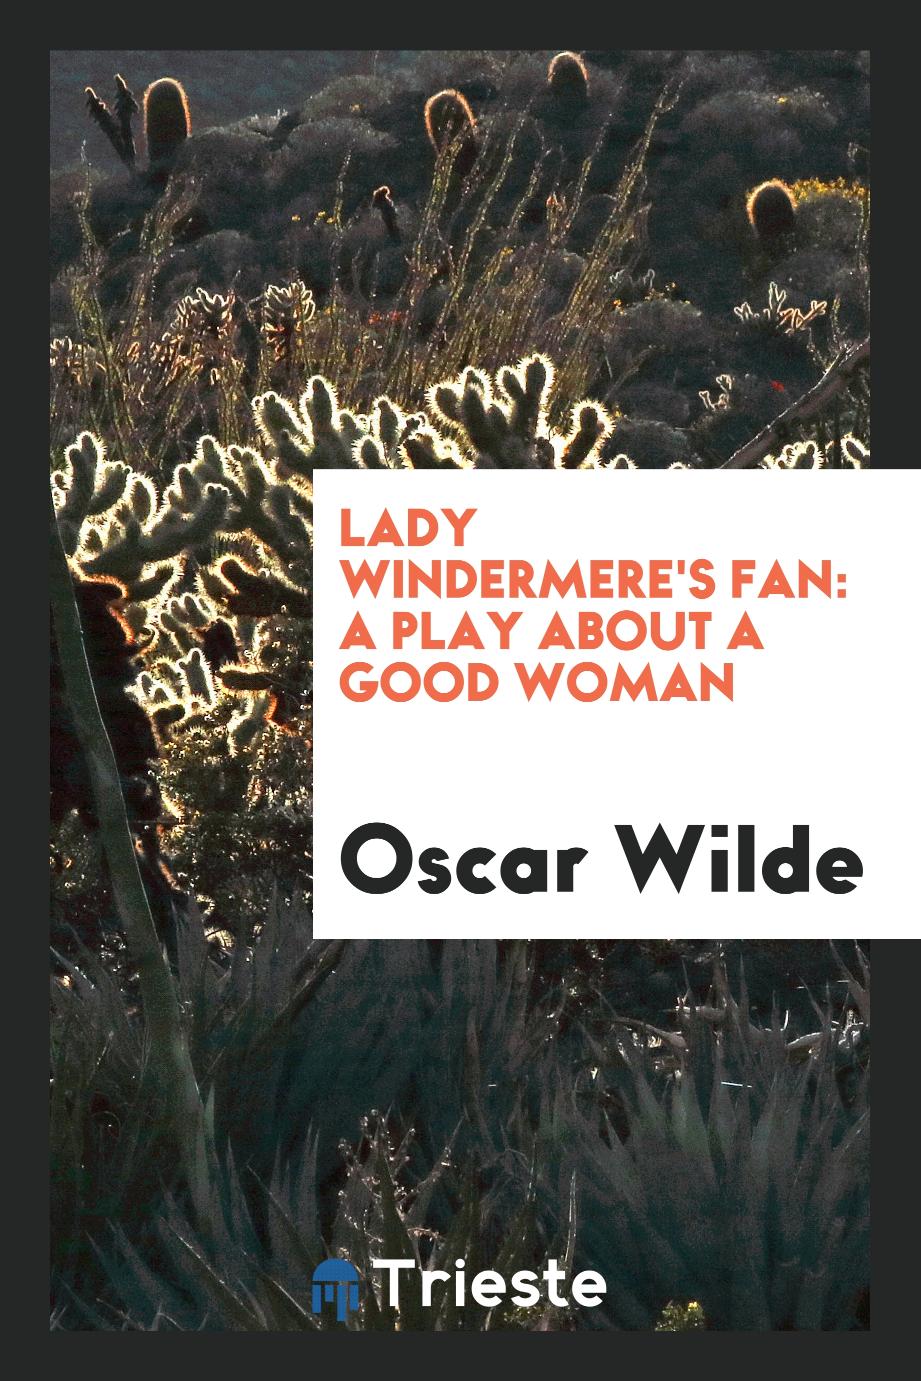 Lady Windermere's Fan: A Play about a Good Woman